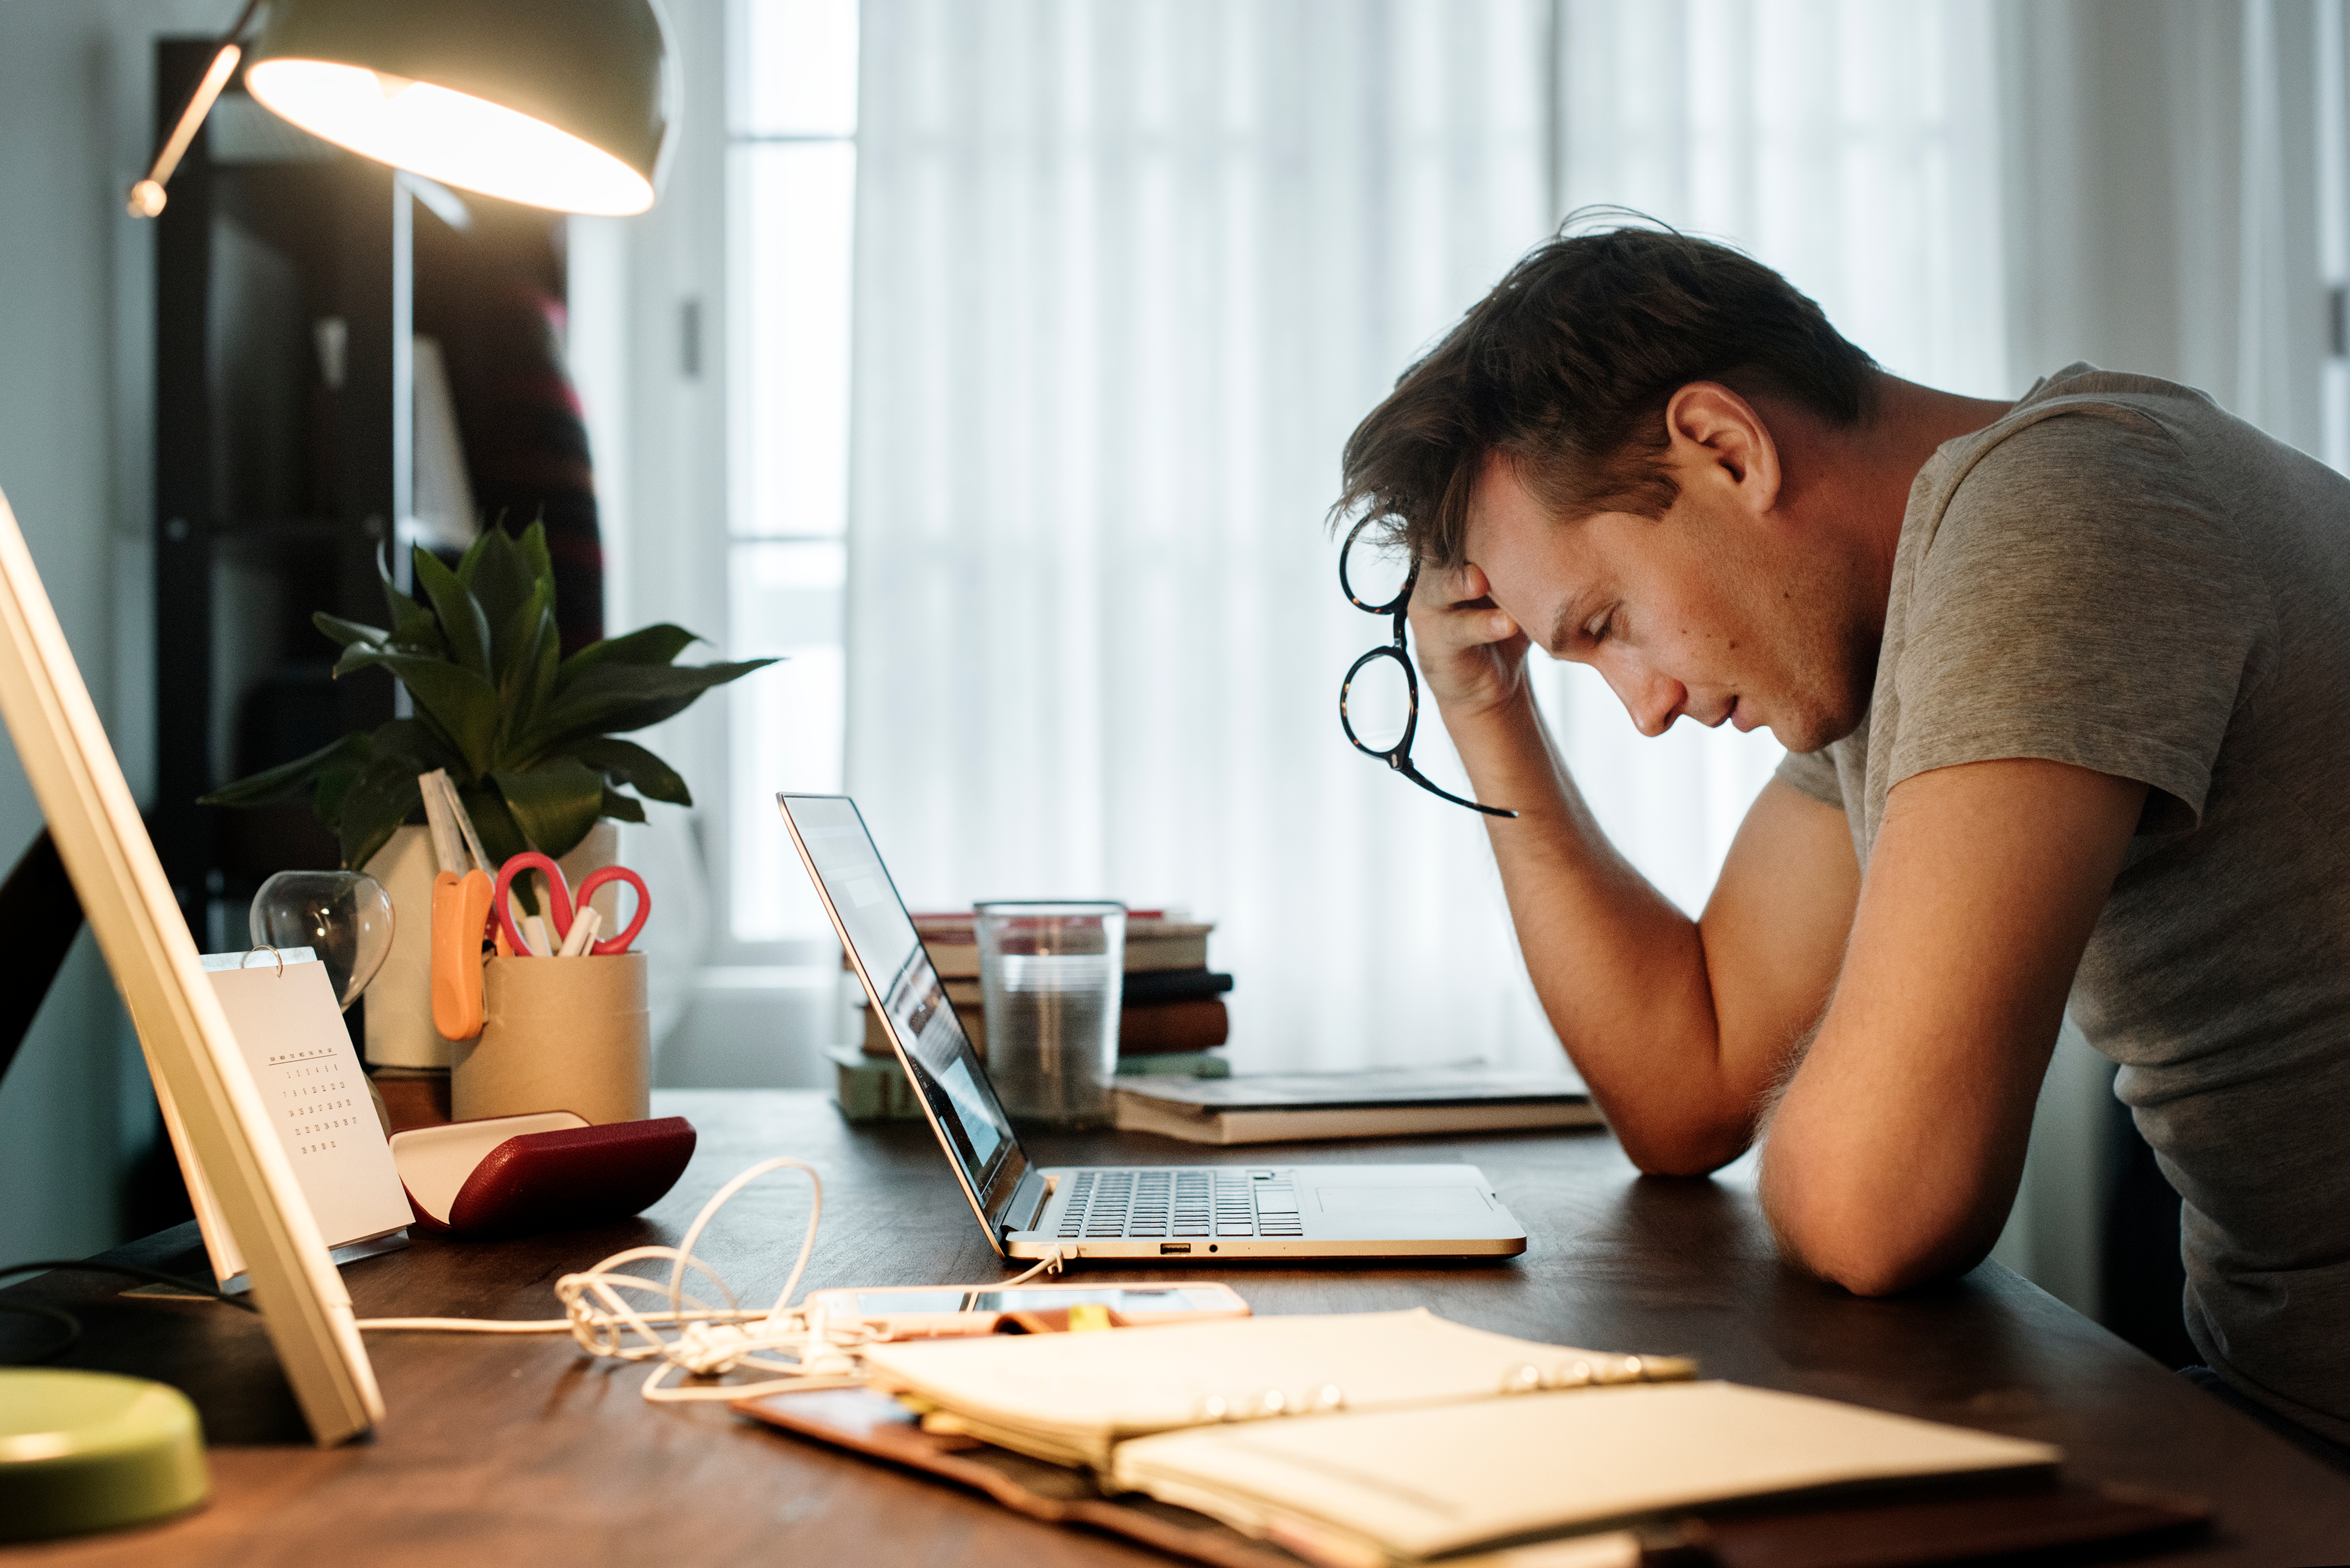 A man looking stressed | Source: Shutterstock